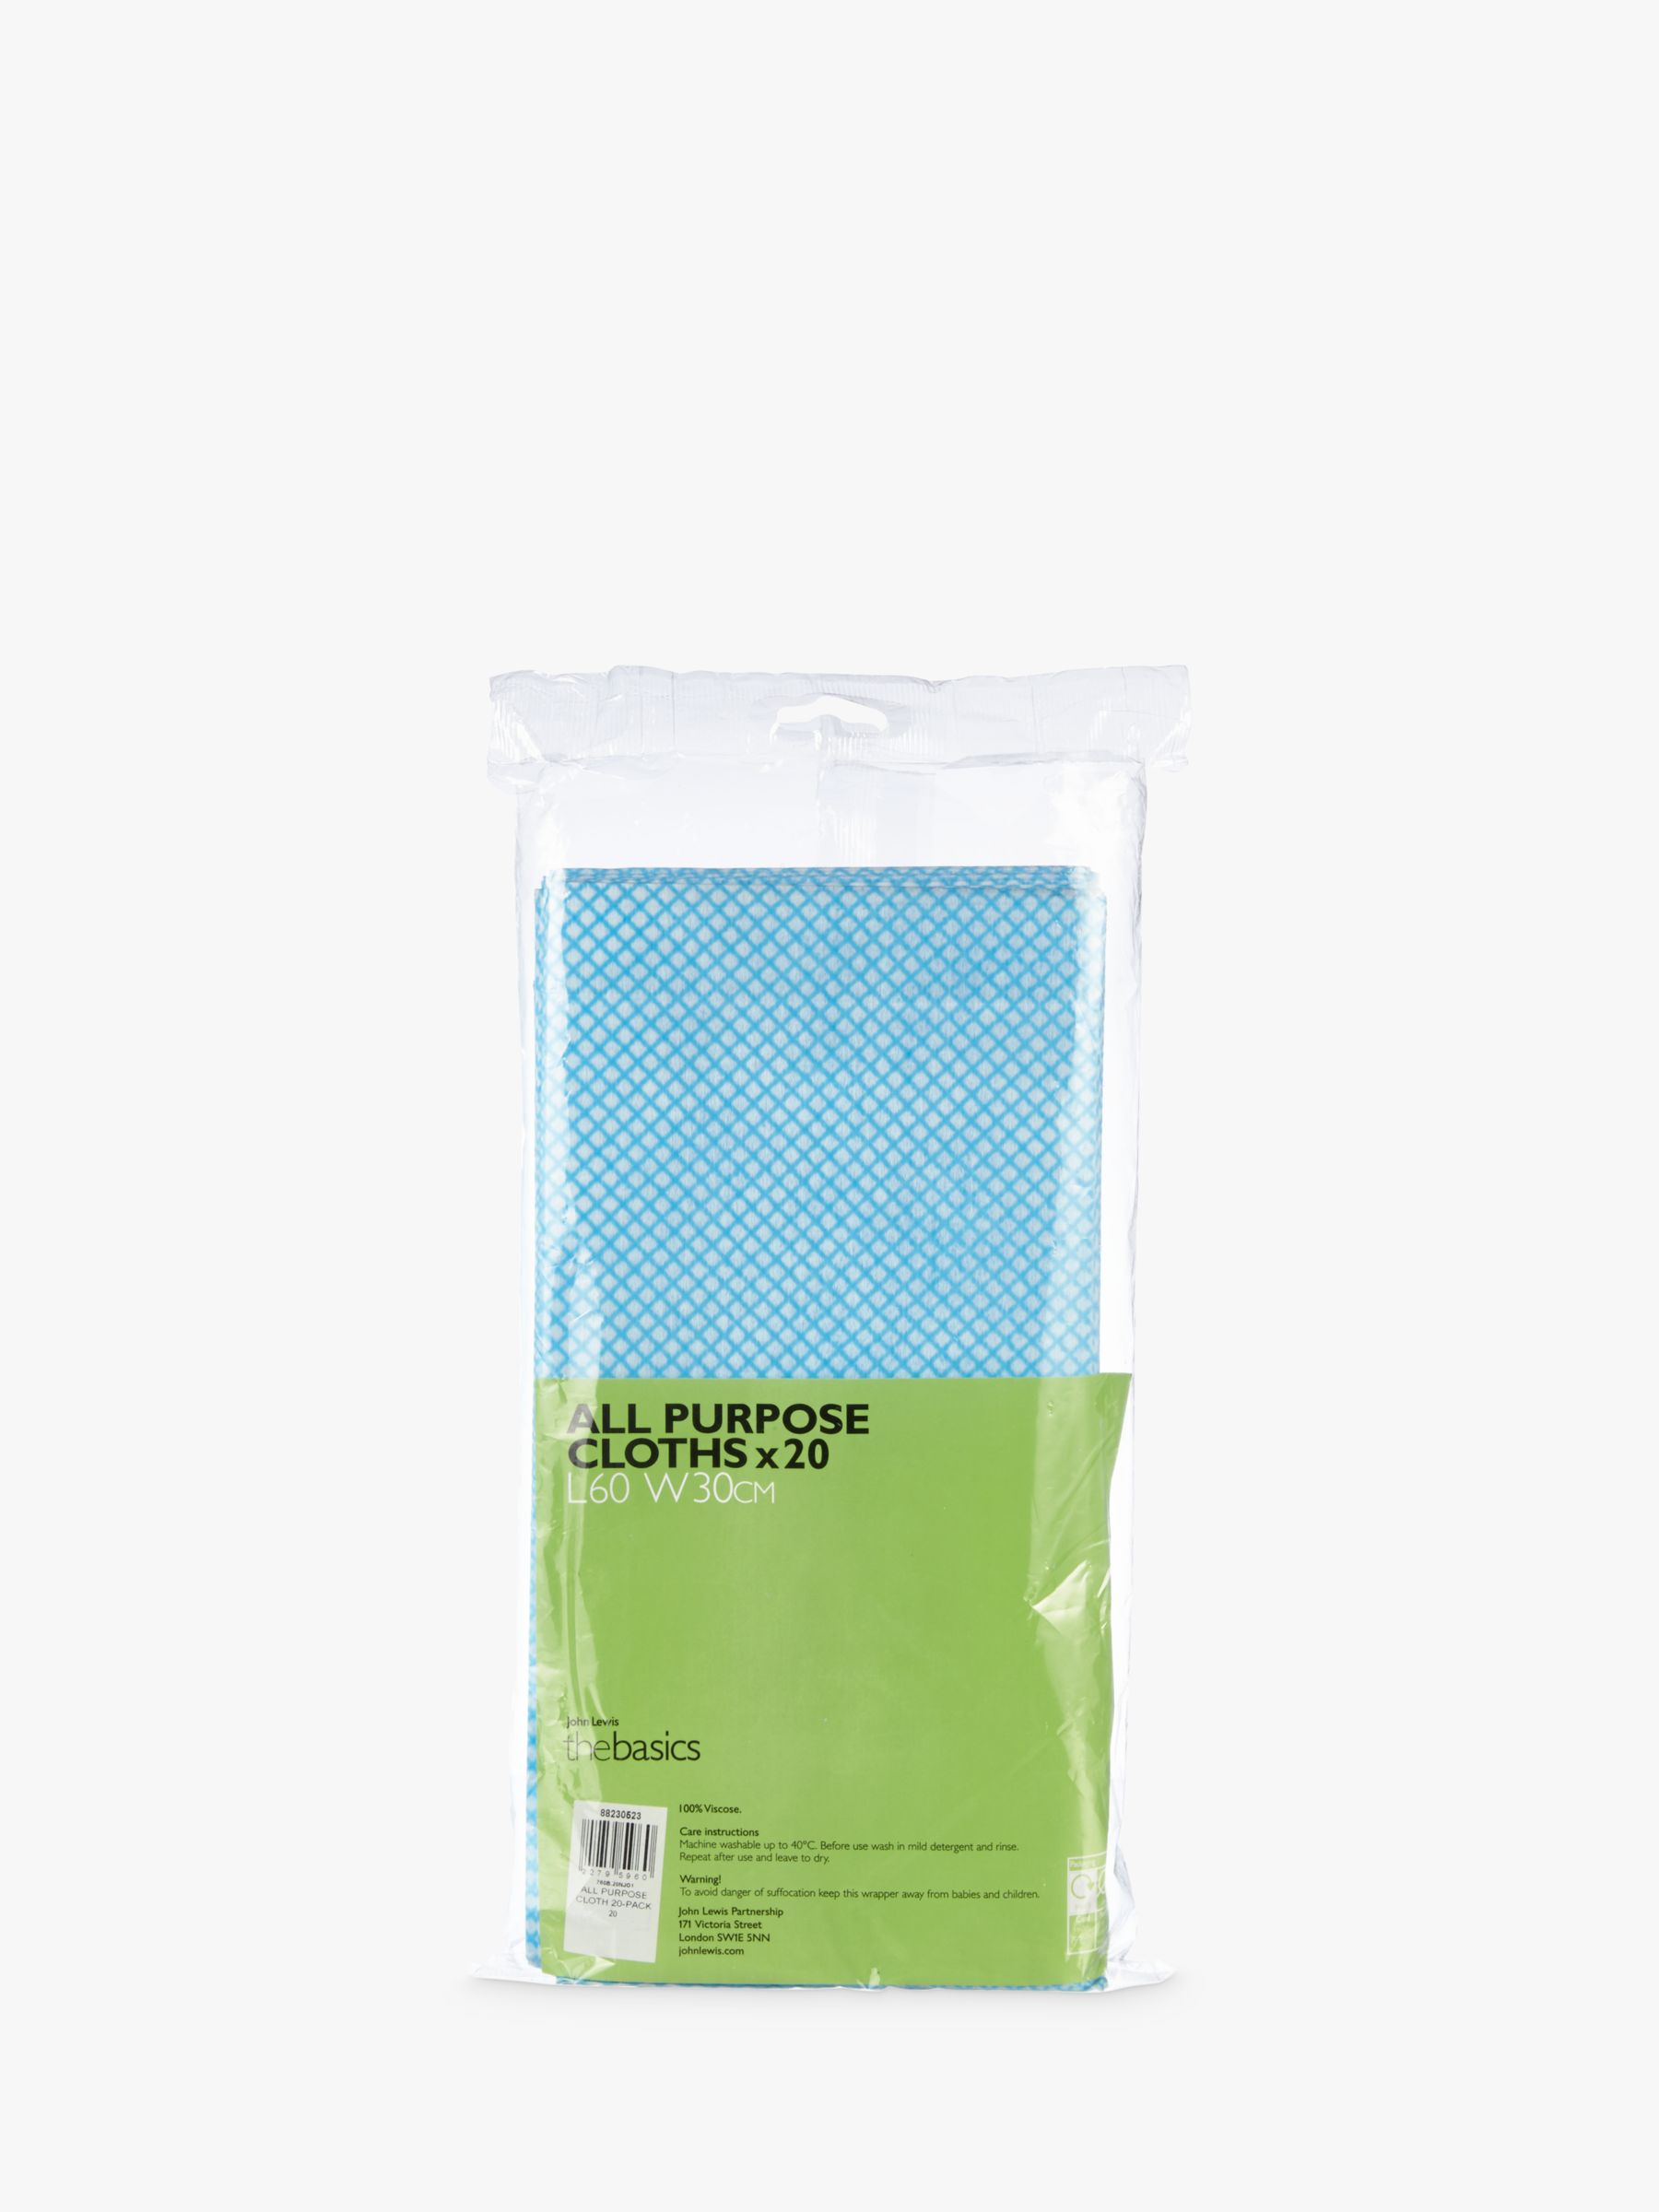 John Lewis The Basics Premium All Purpose Cleaning Cloths, Pack of 20